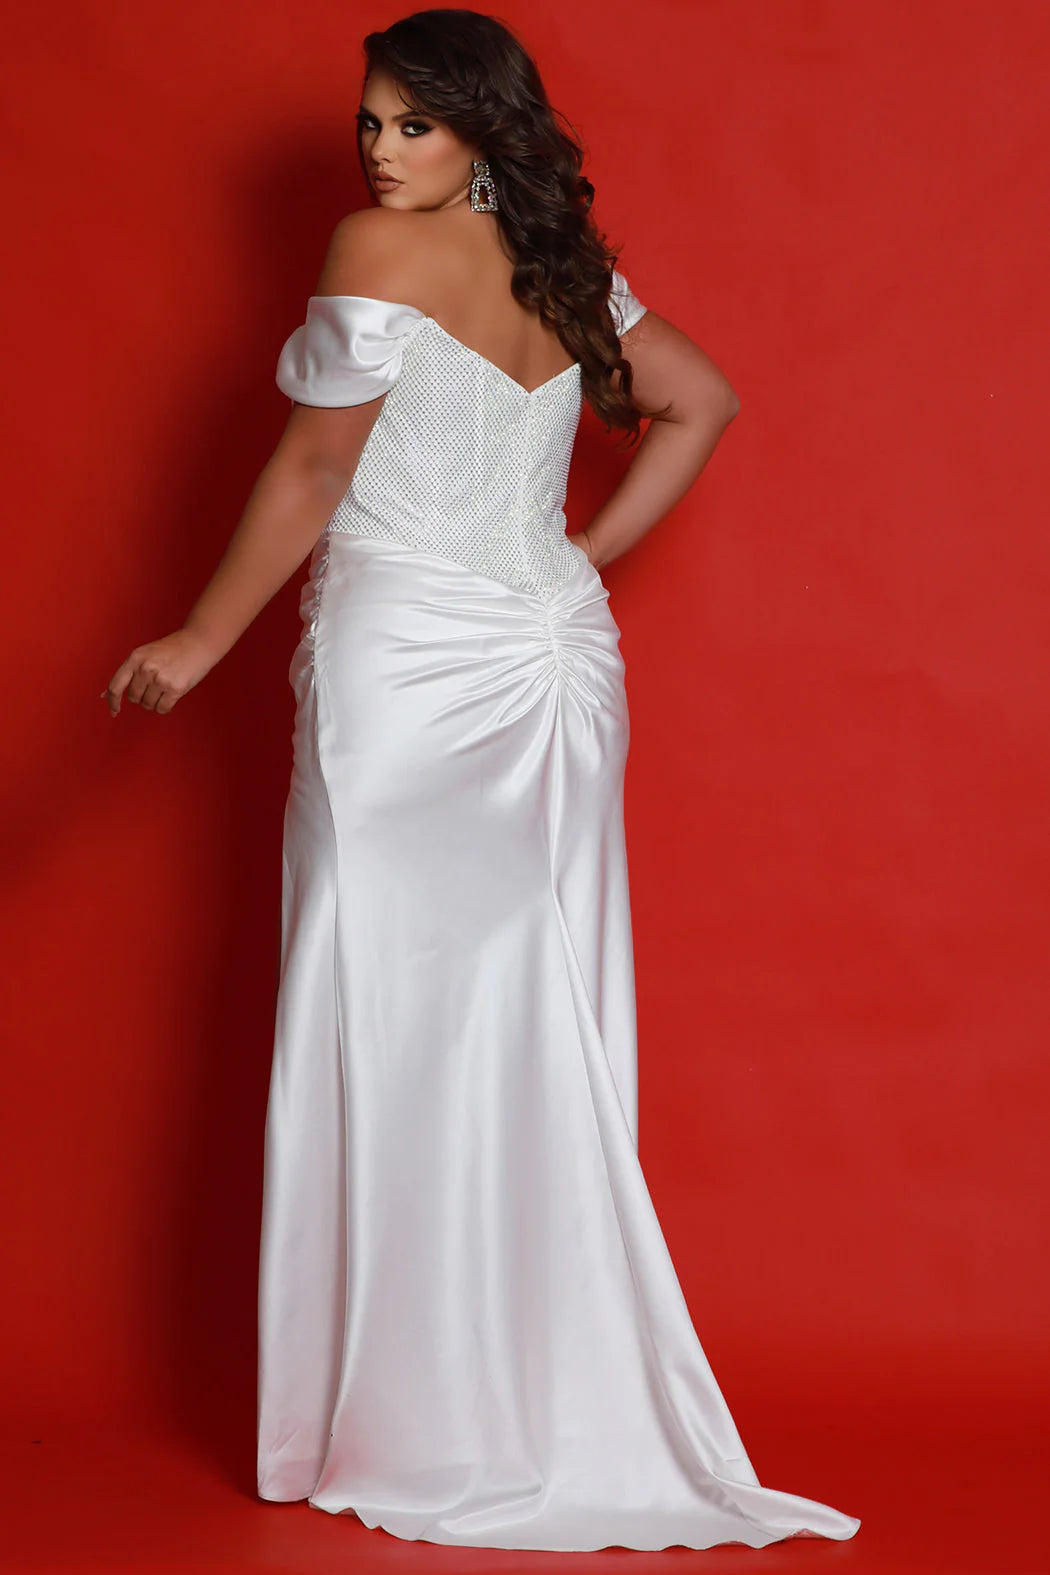 Look gorgeous in Sydneys Closet JK2417 Prom Dress. This stunning fitted maxi dress features an off-shoulder neckline, corset bodice with satin cape detail, and a thigh-high slit for a modern and sleek look. Ideal for proms, pageants, and other special occasions. Plus size available. Our showstopping Grand Marshal plus size pageant gown shines under the spotlight with a very trendy glitter corset top. 